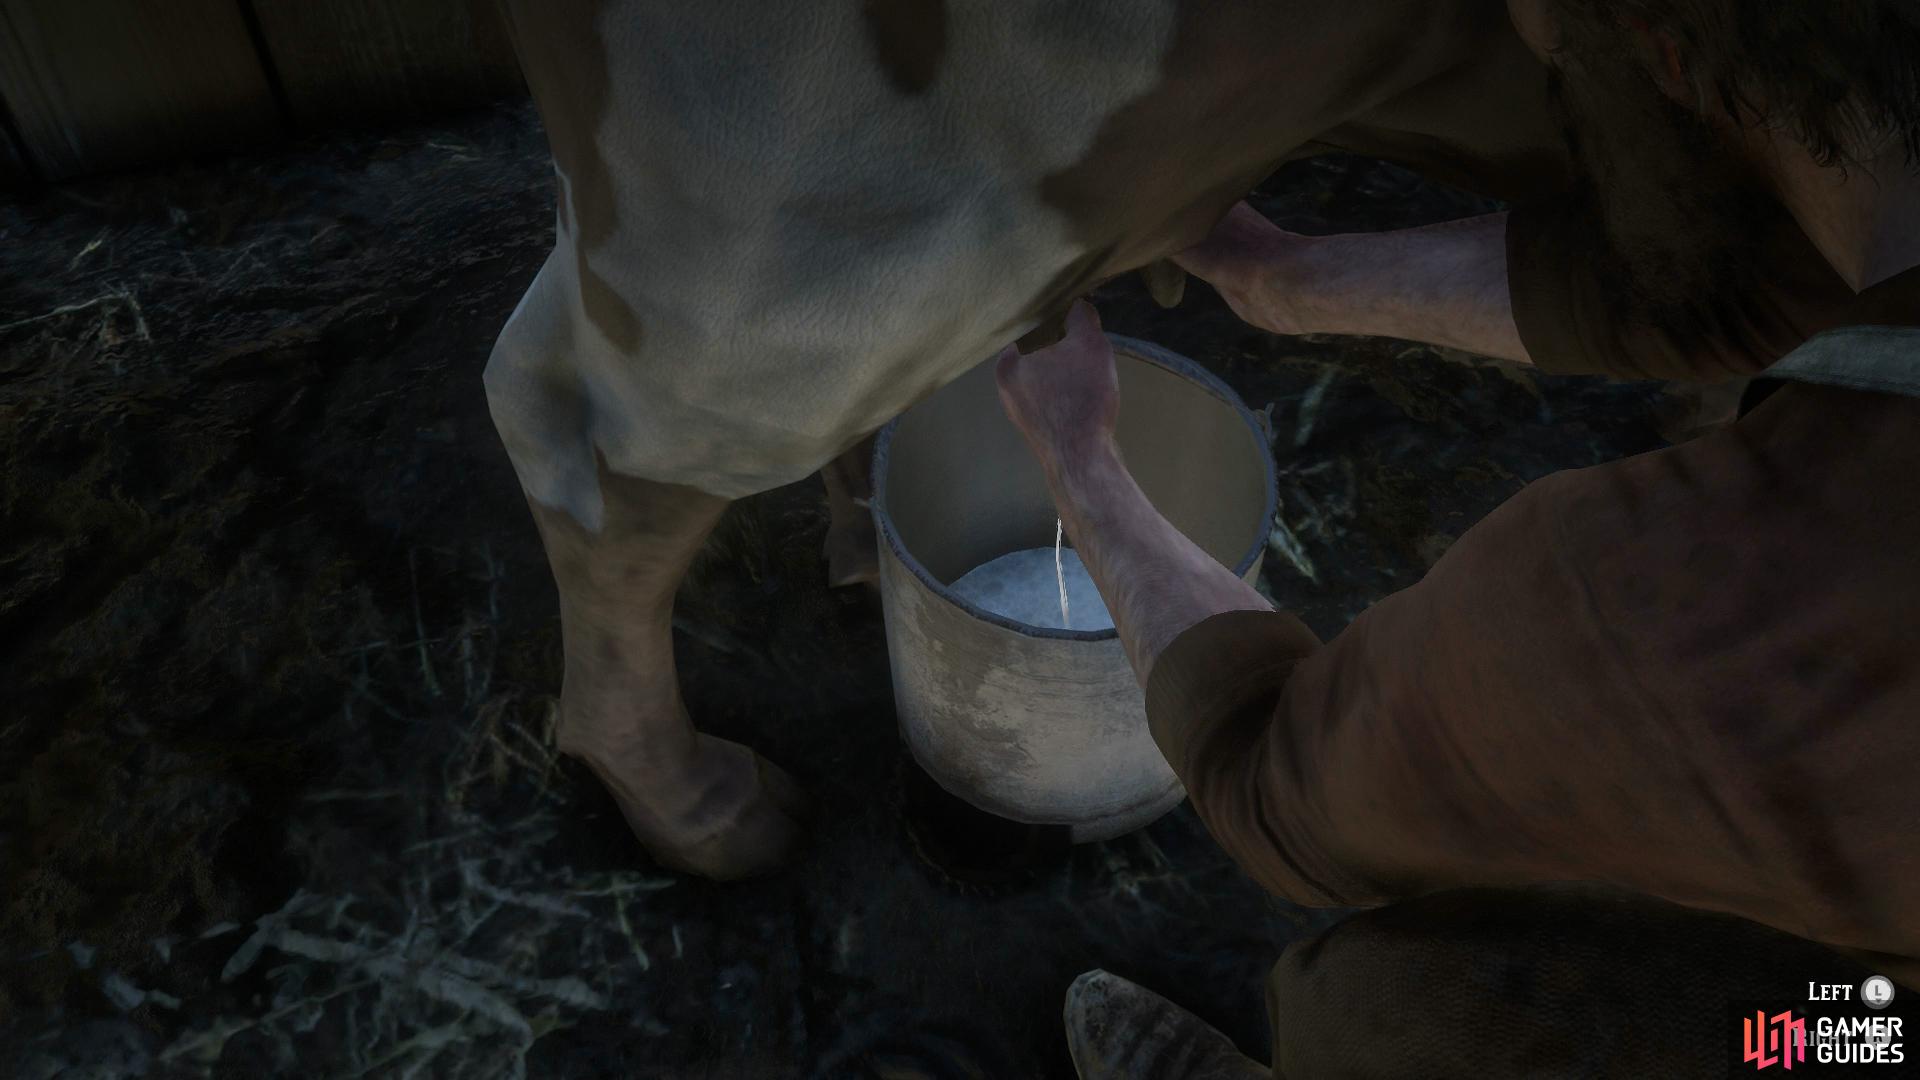 Opt for milking the cow when given a choice of chores.